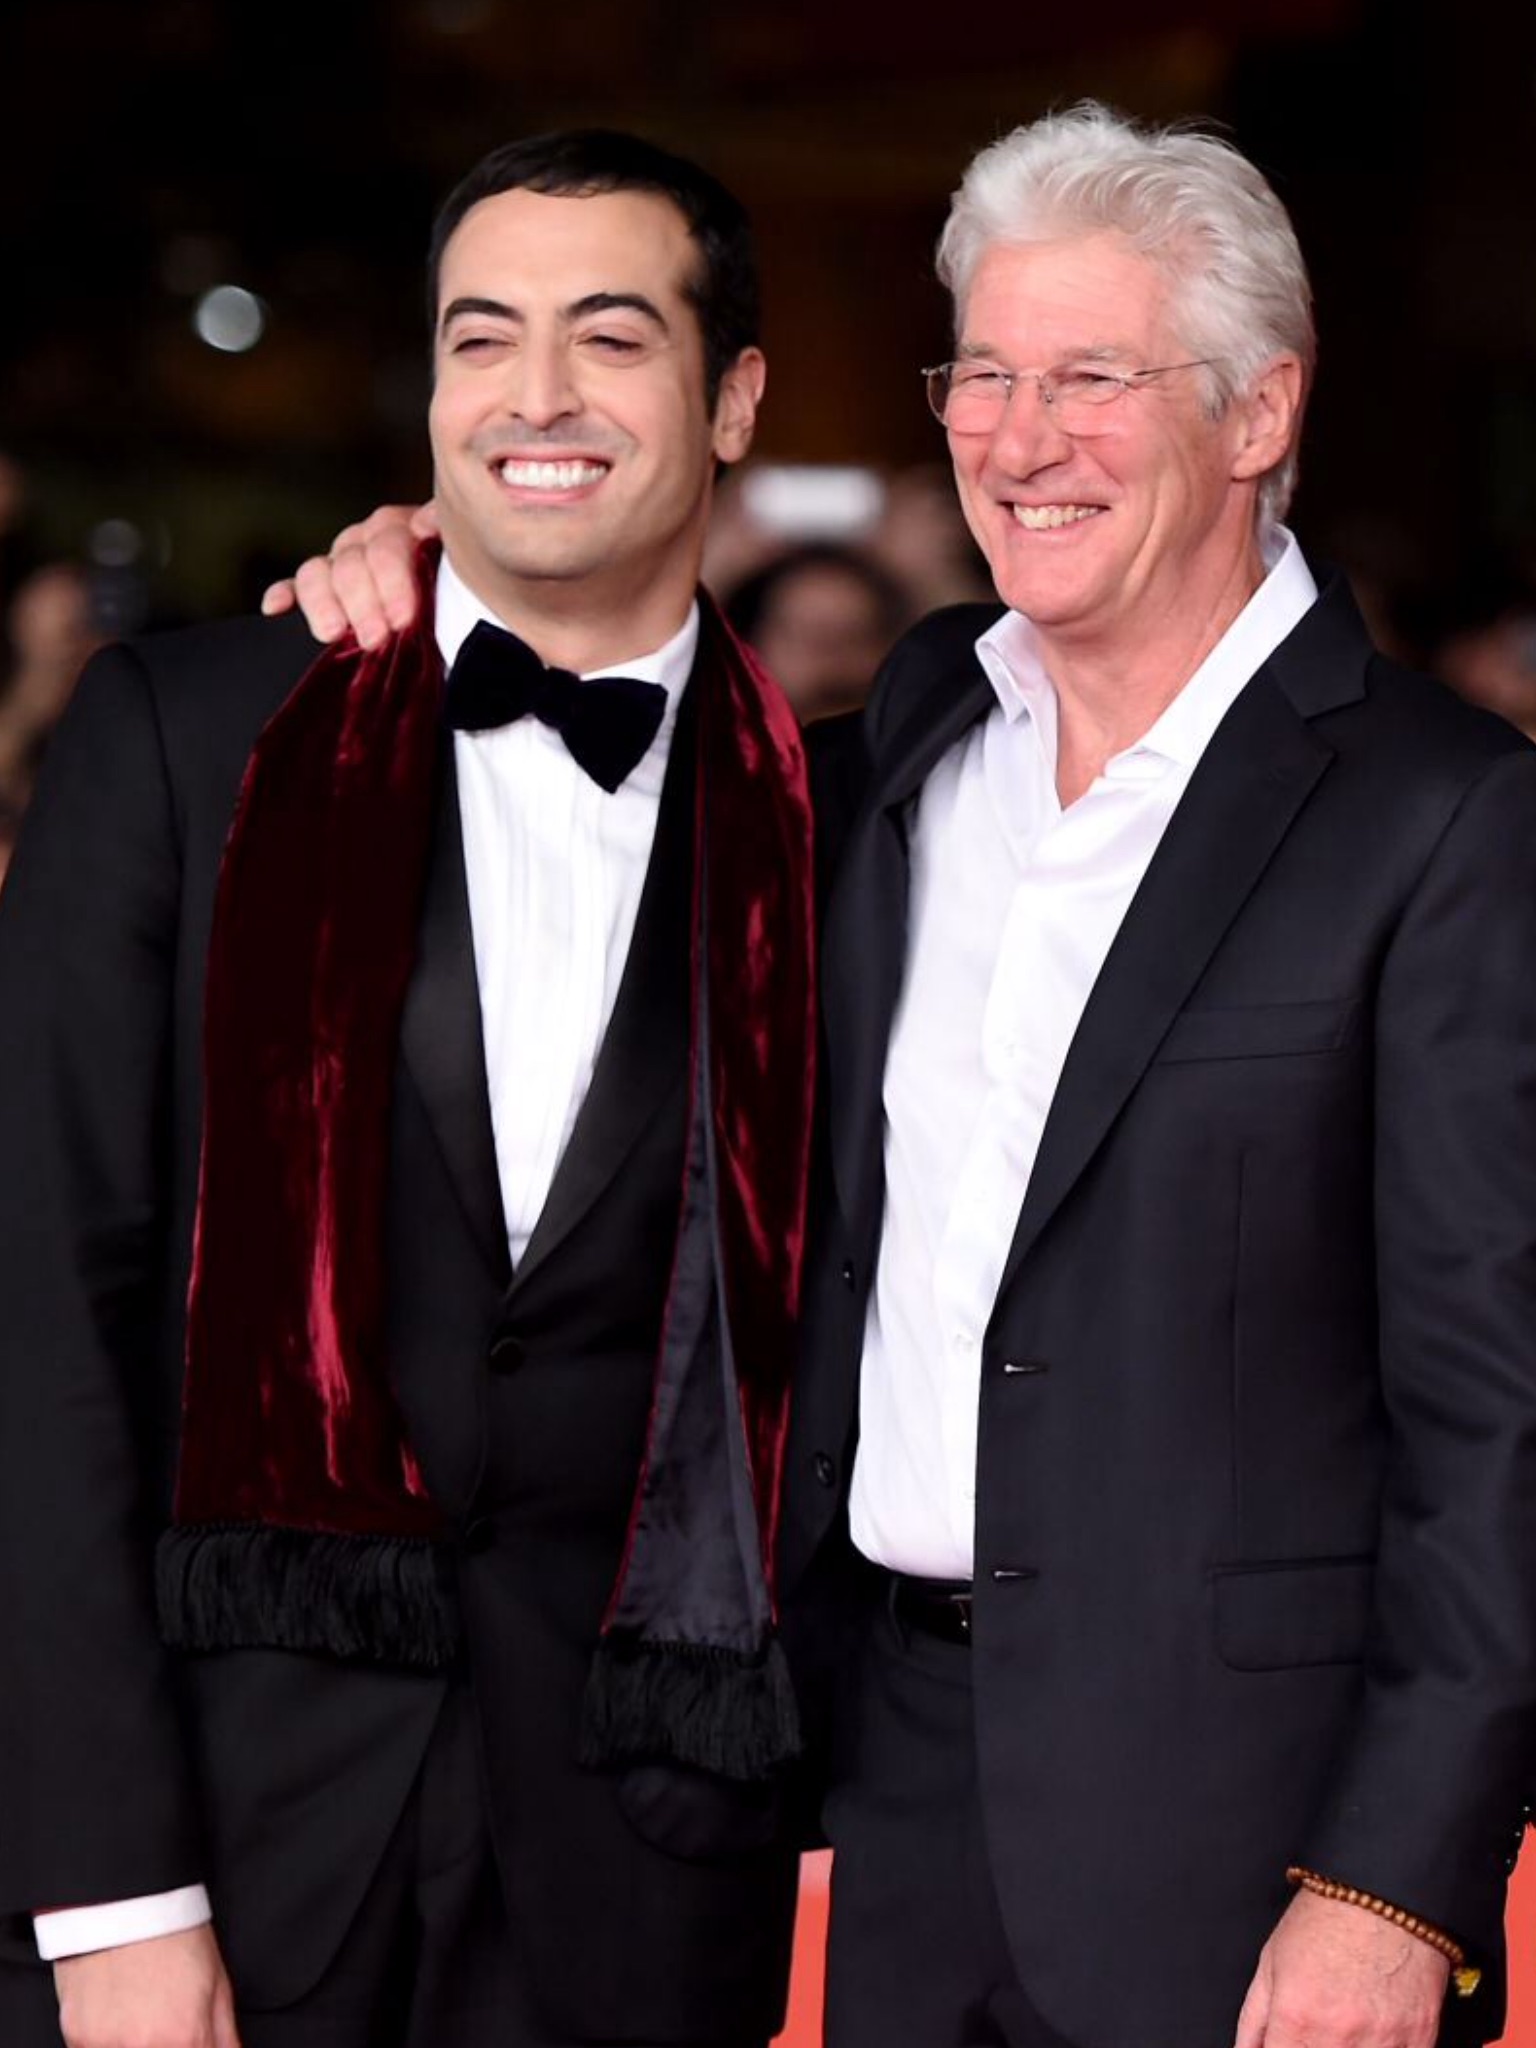 Mohammed Al Turki and Richard Gere attend the 'Time Out of Mind' Red Carpet during the 9th Rome Film Festival on October 19, 2014 in Rome